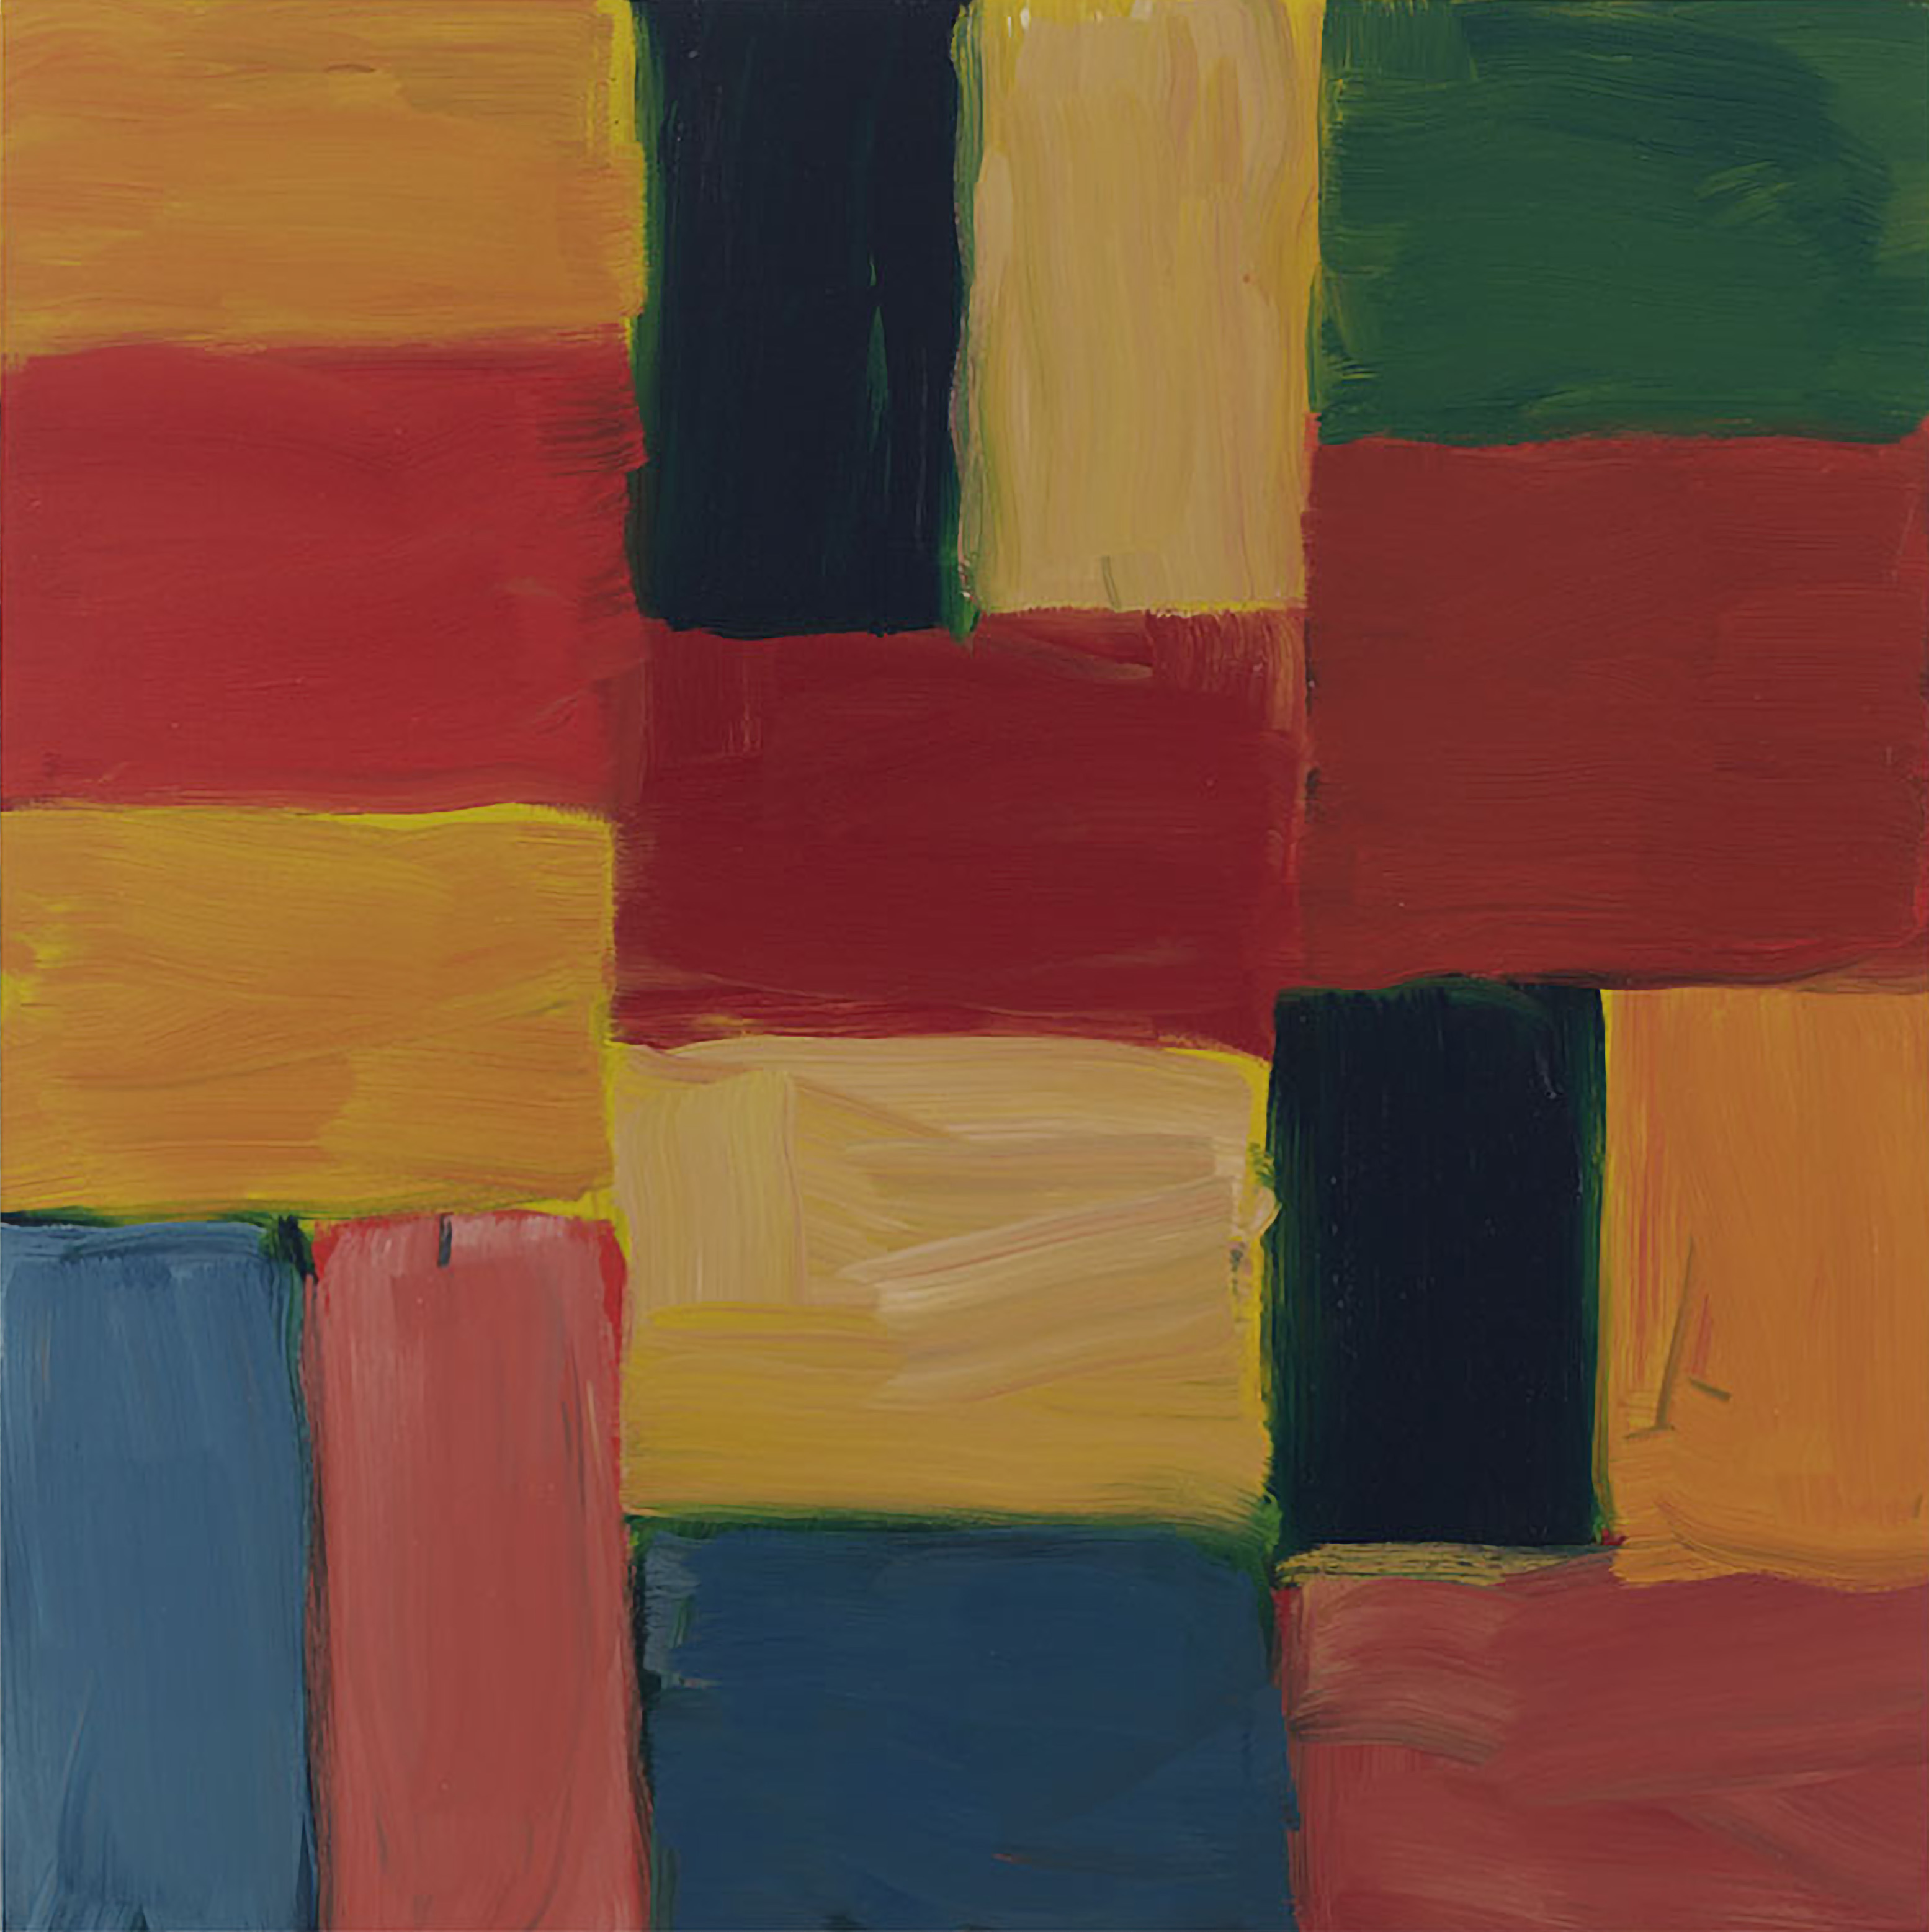 Sean Scully: Wall Red Red, 2020, oil on Linen, 160 x 160 cm / 63 x 63 in | Double-M, Double-X | Saturday 17 October 2020 – Saturday 16 January 2021 | Kerlin Gallery